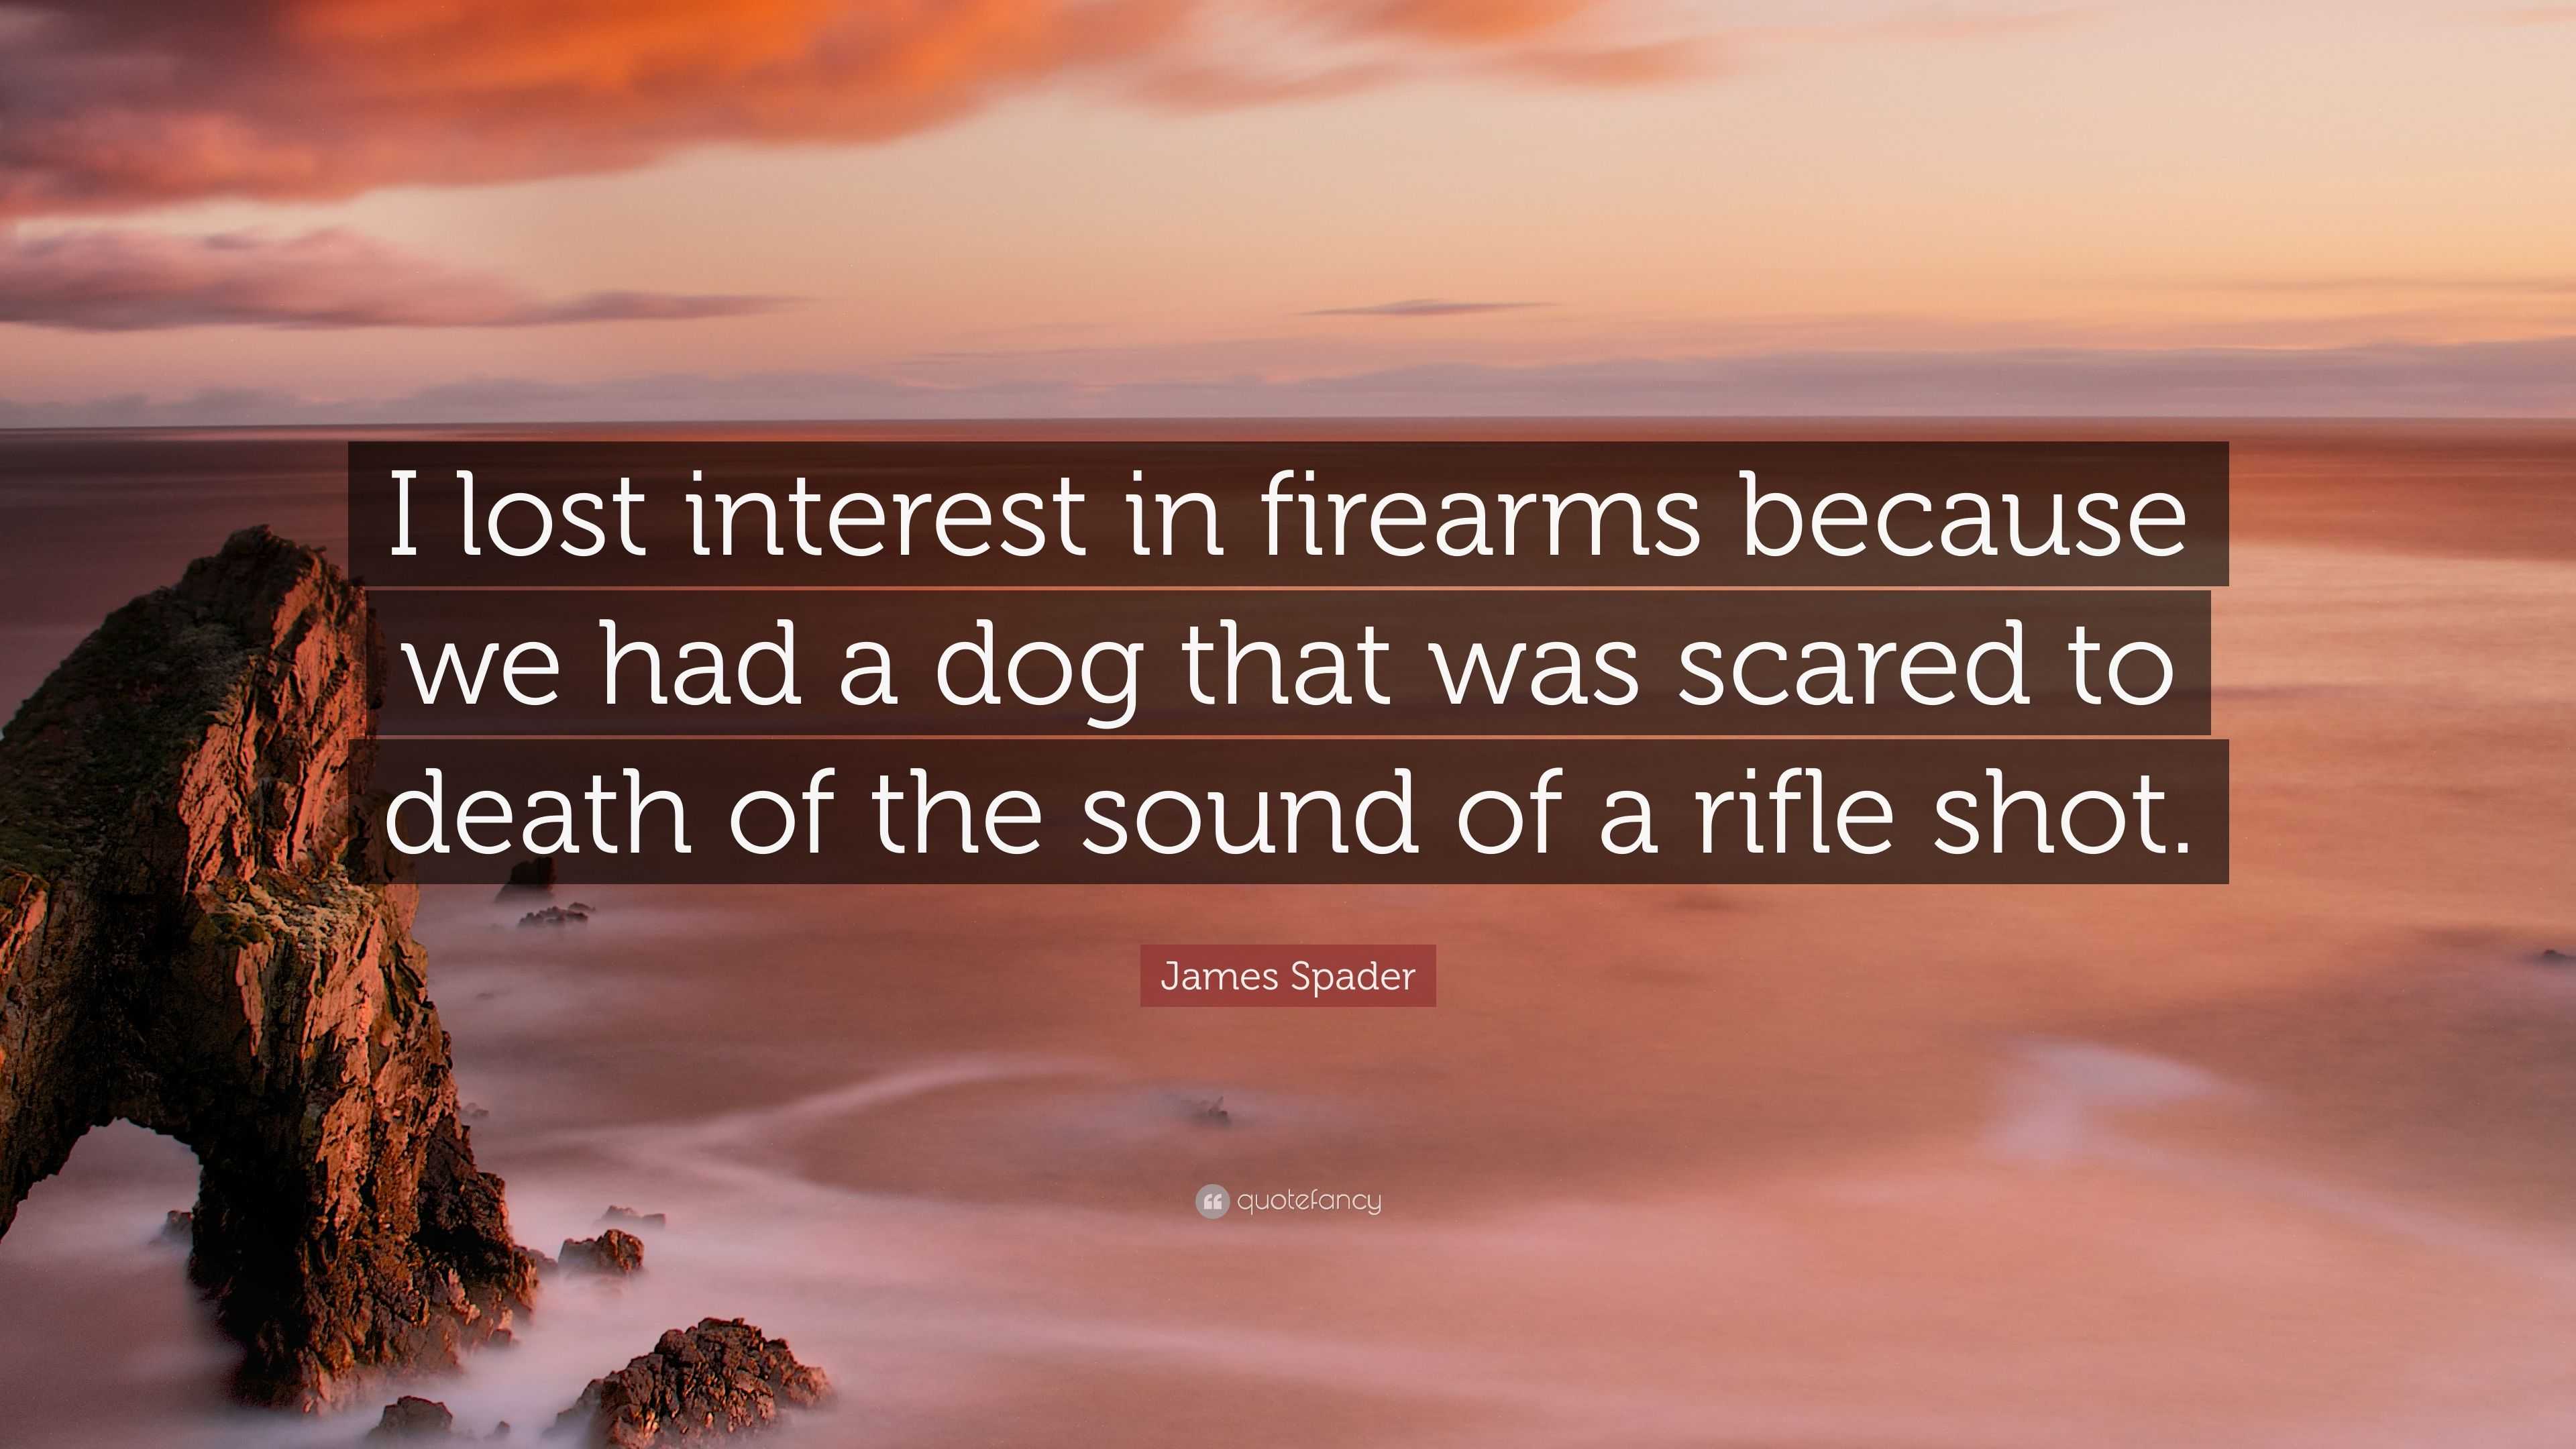 James Spader Quote: "I lost interest in firearms because ...